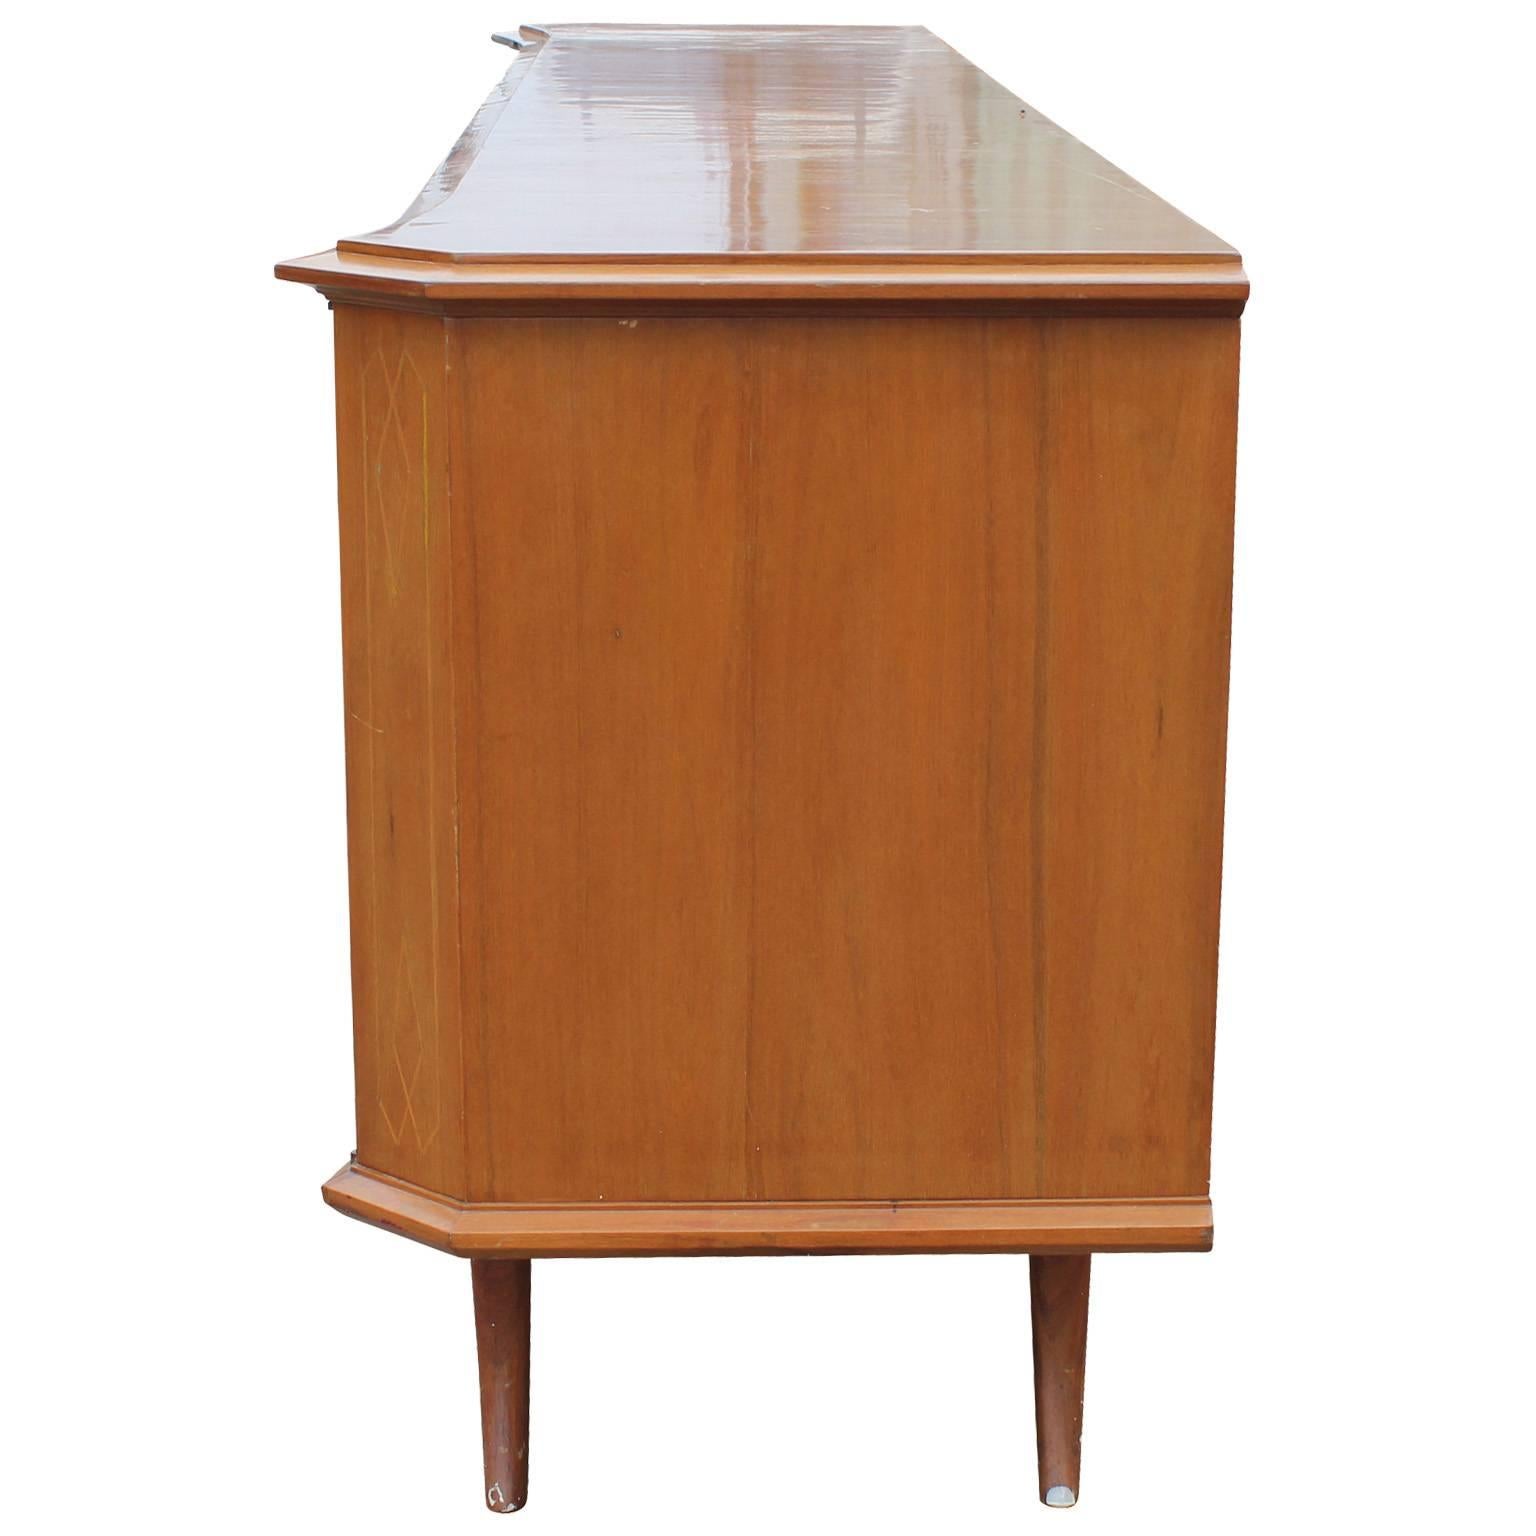 Mid-20th Century Monumental Italian Sideboard with Dentil Motif Base and Saber Legs